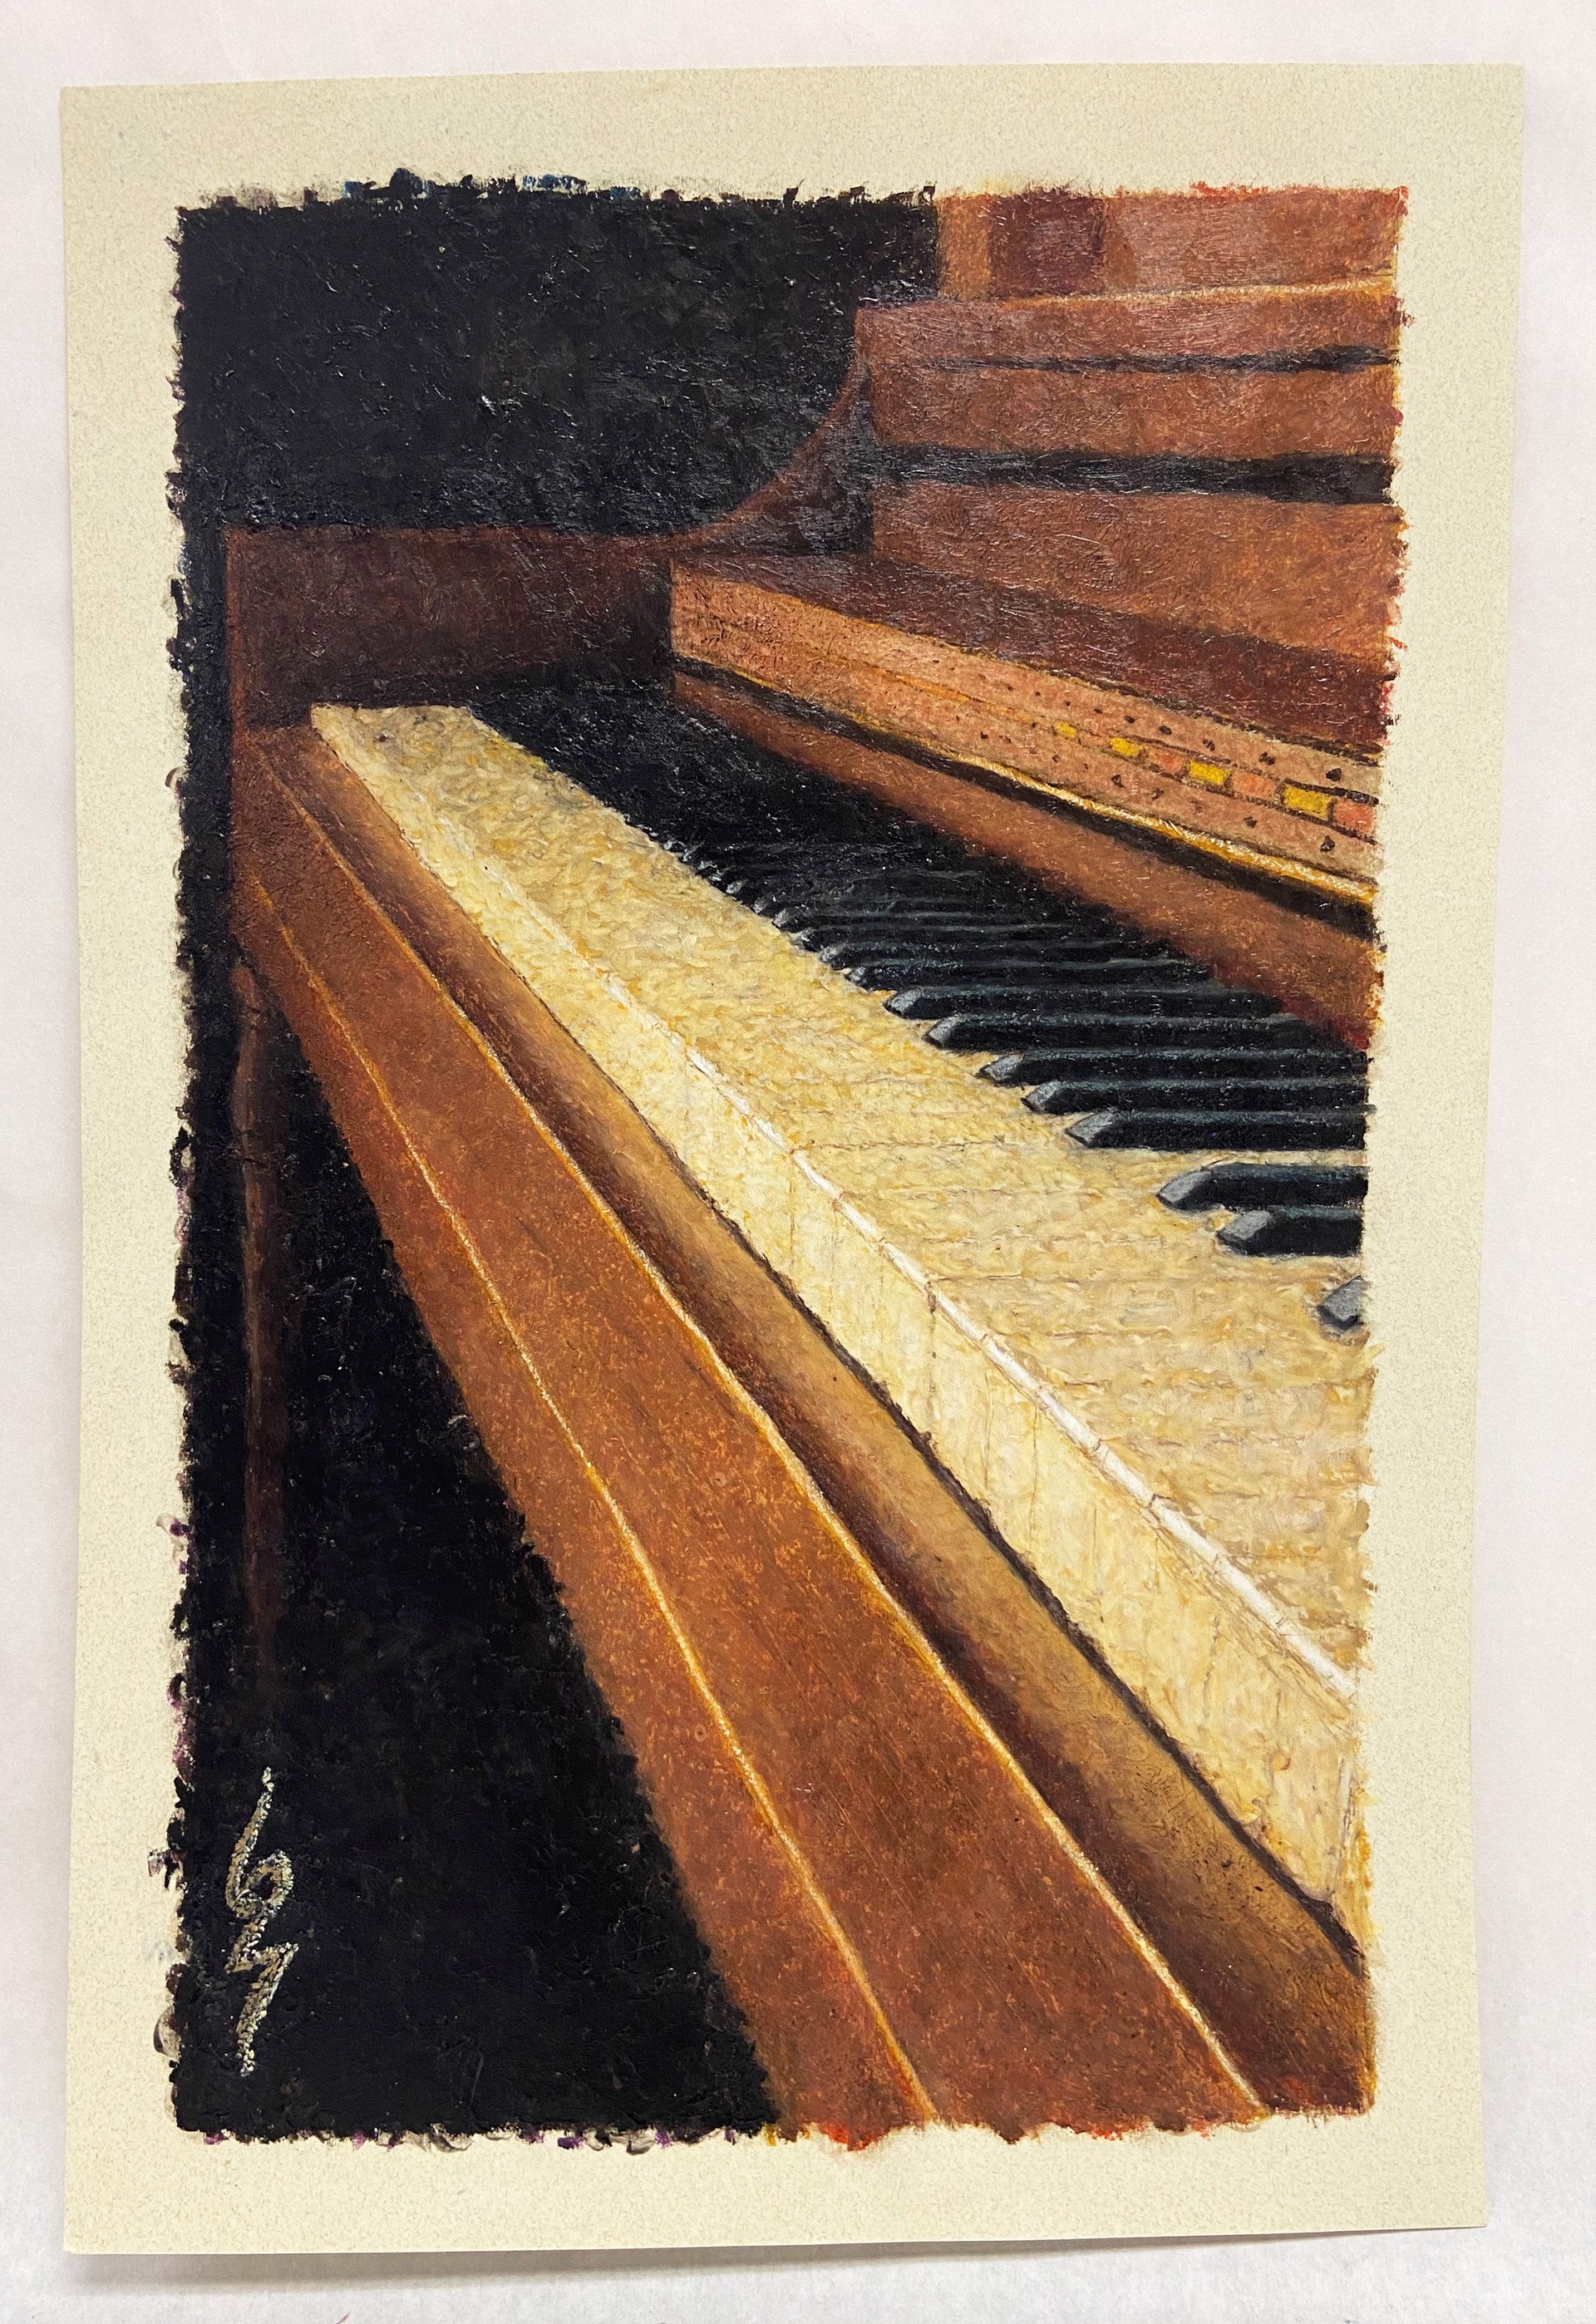 The Piano by S. Mullikin